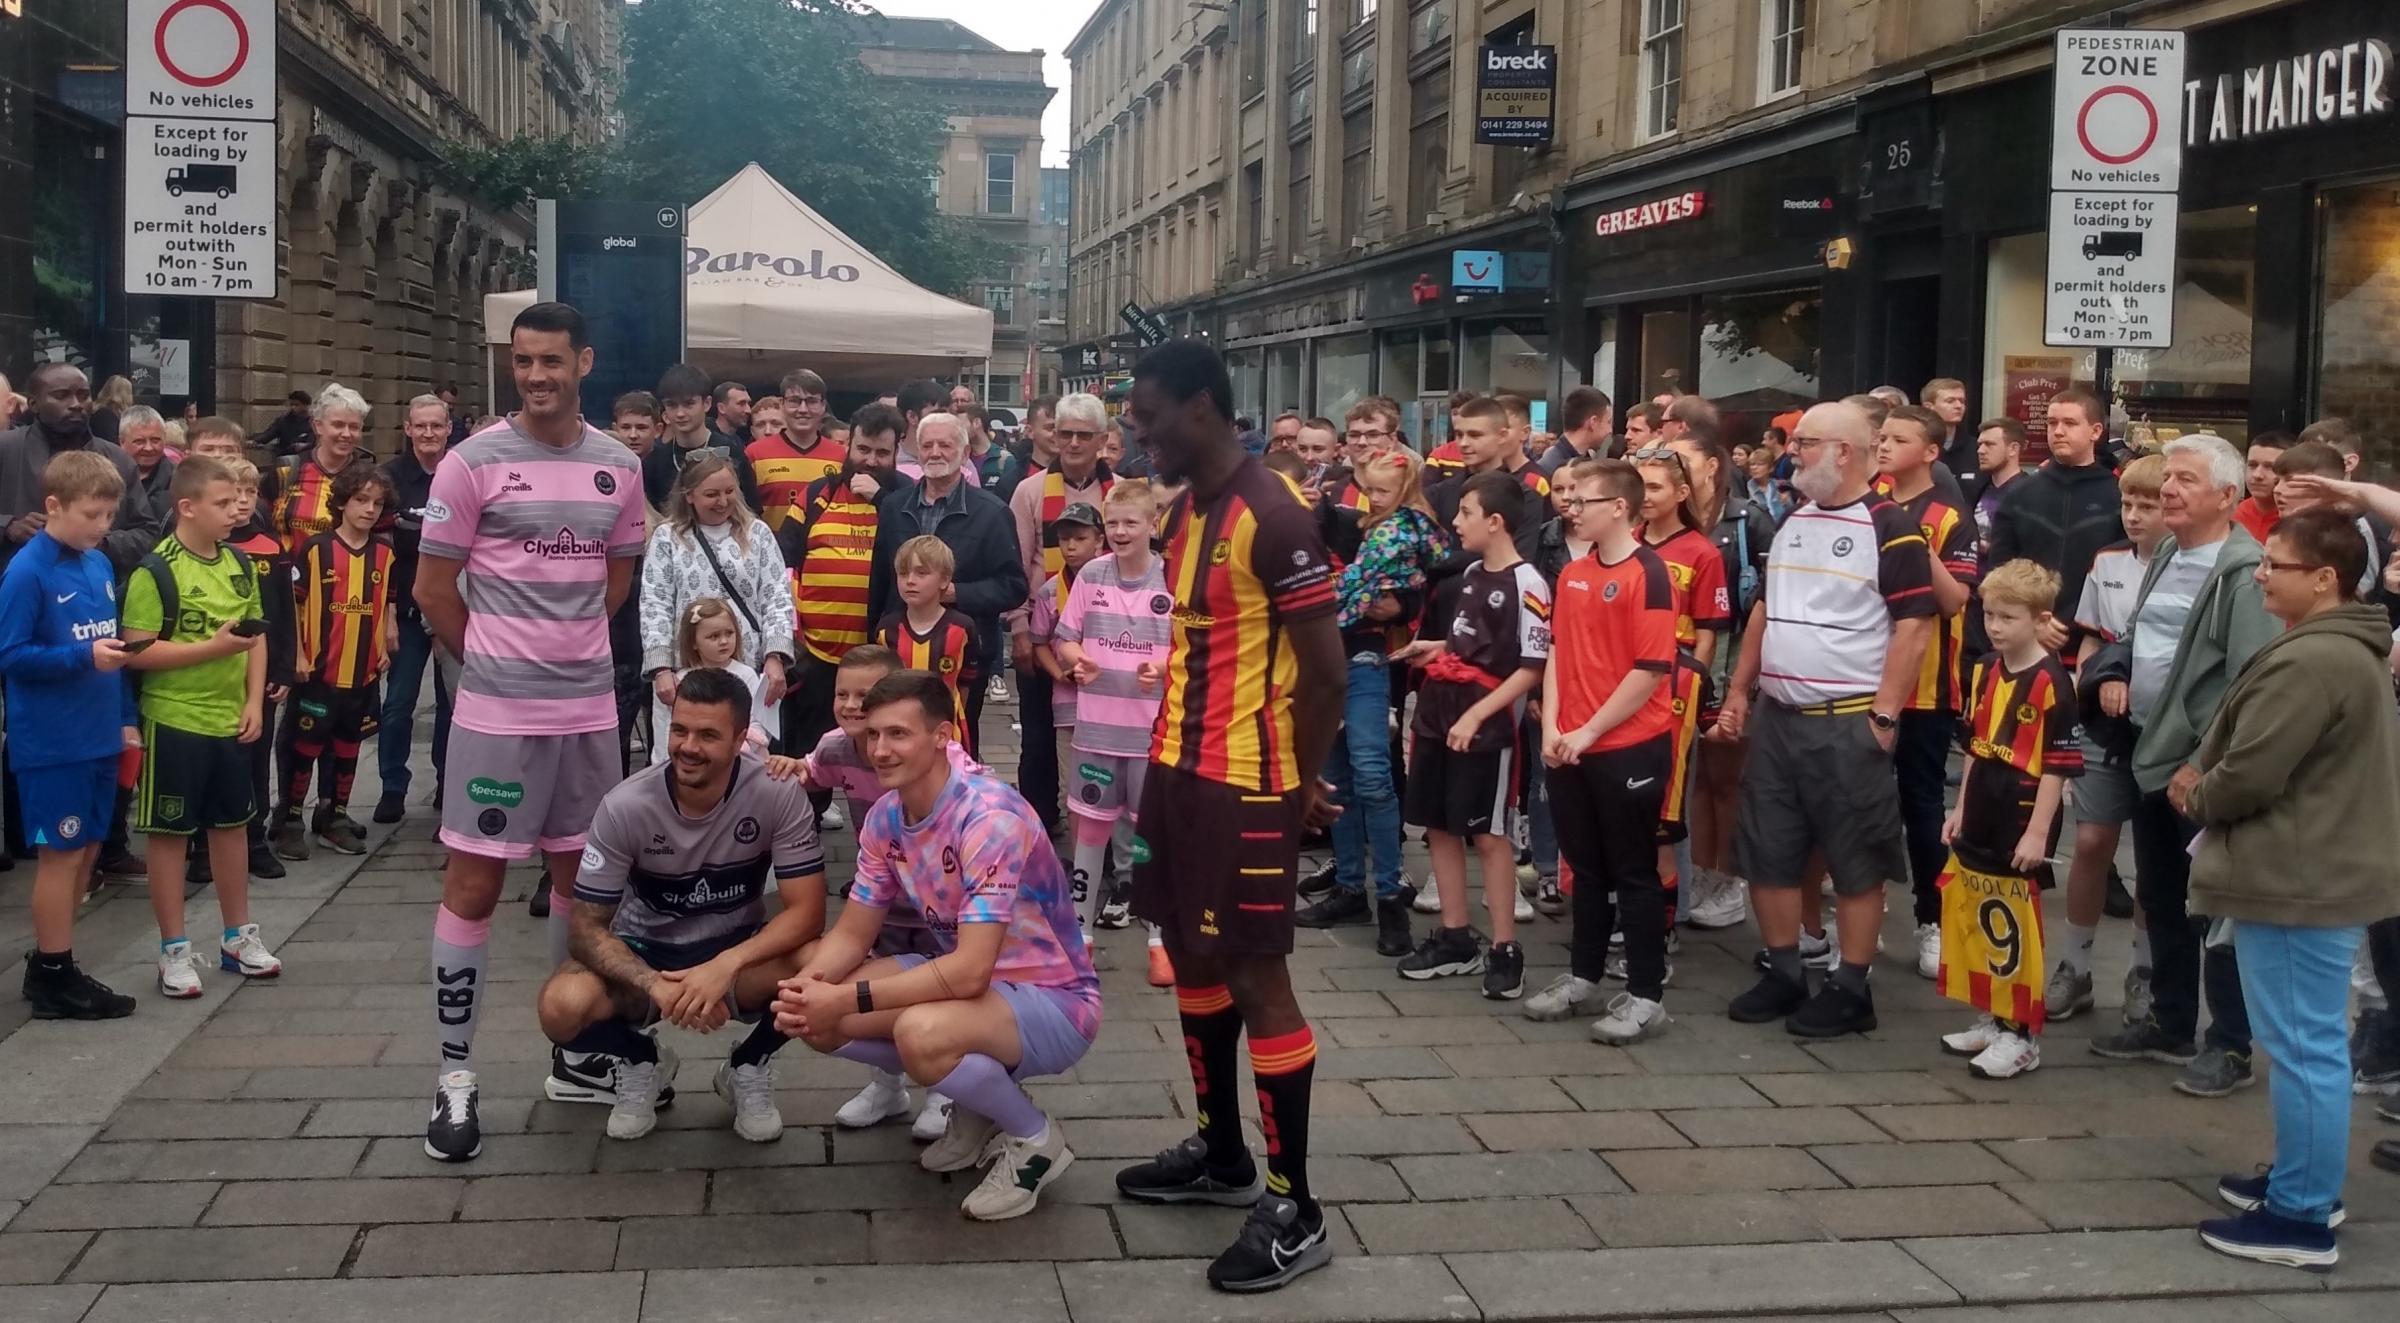 Partick Thistle players meet and greet fans in city centre street